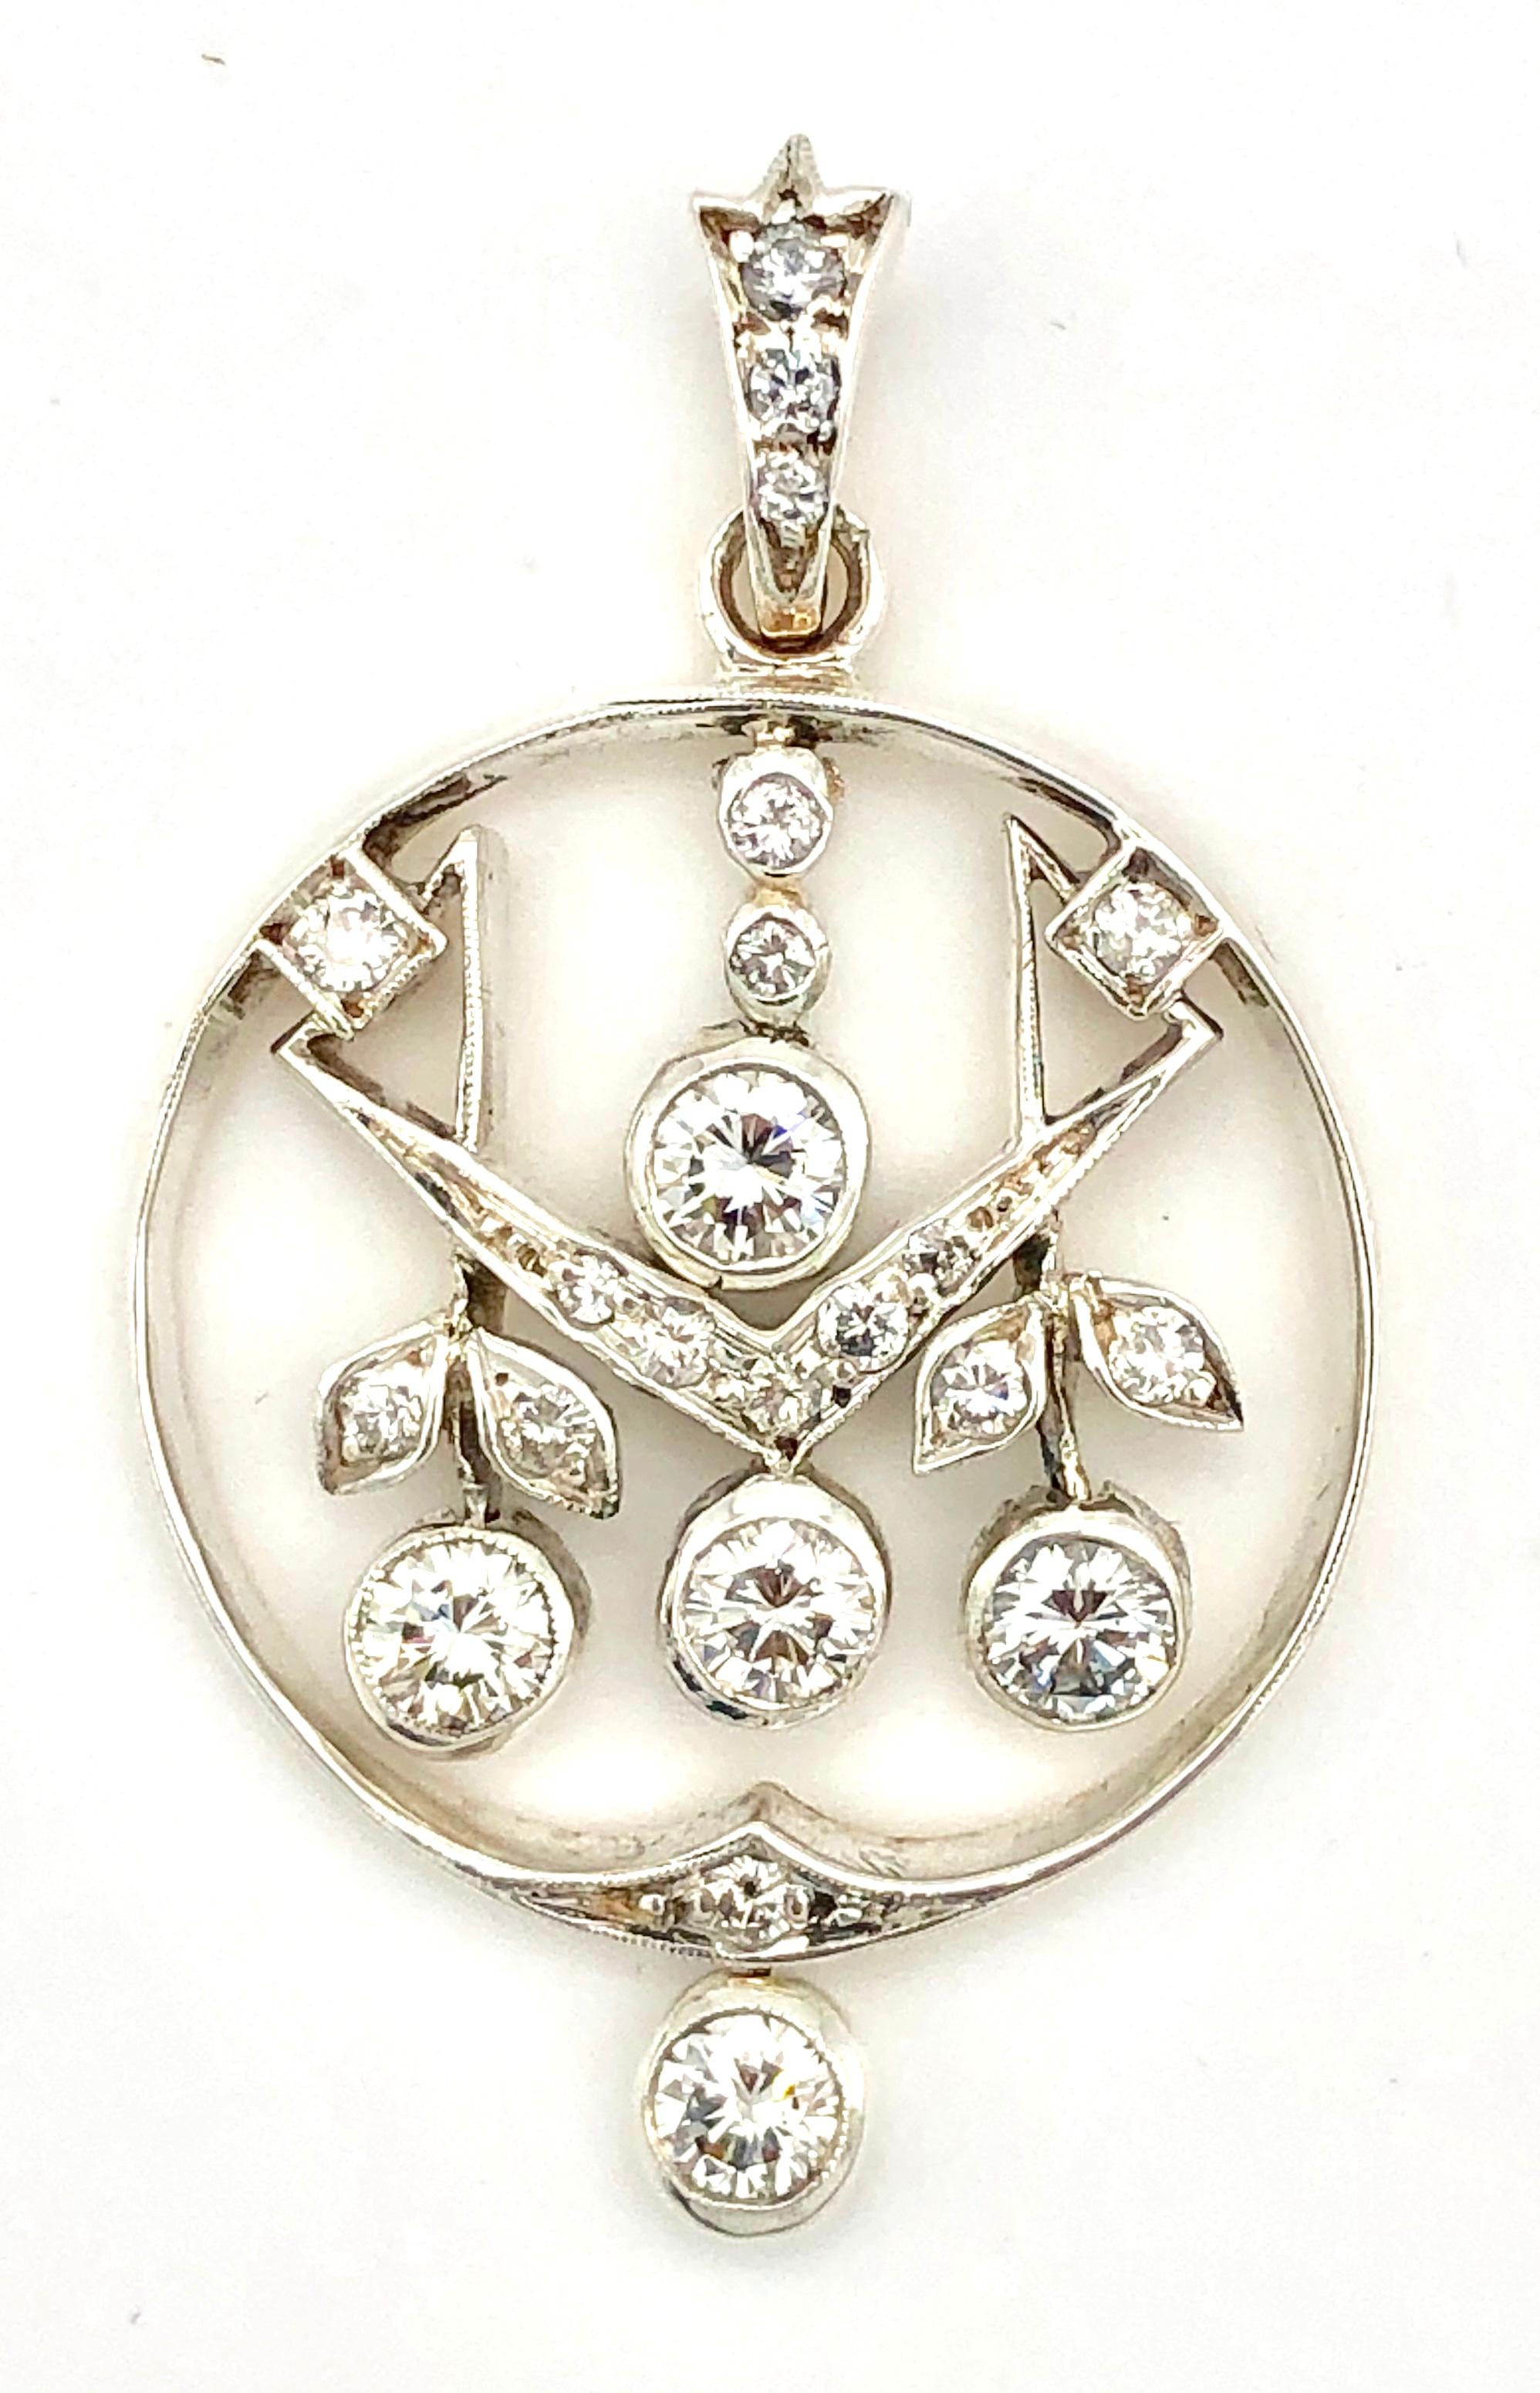 This very charming  Art Nouveau pendant has been made round about 1900 in Austria. Five articulated round diamonds are supended from a frame in the shape of an apple. Two of the dangling diamonds are designed as two little flower buds with diamond